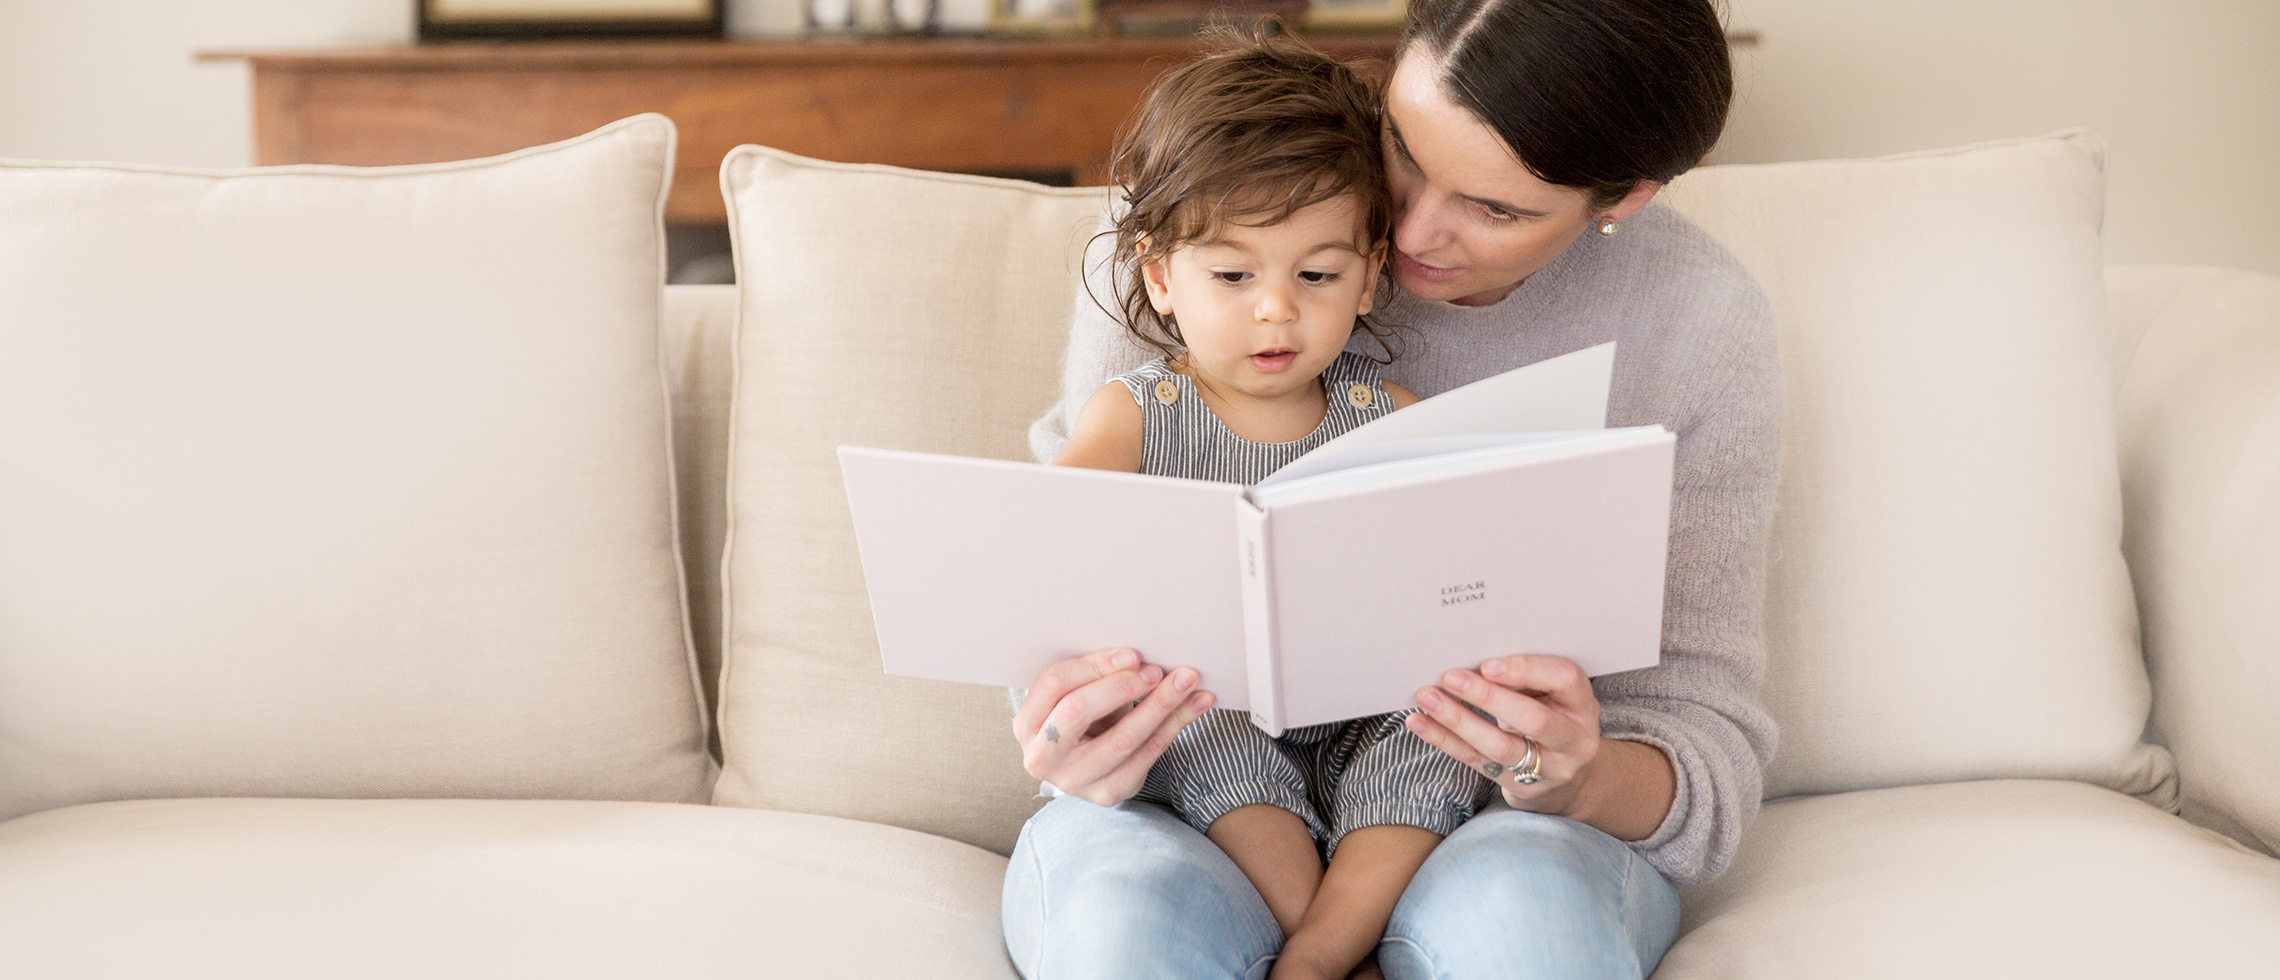 Mother and child looking through MILK Photo Book together on couch